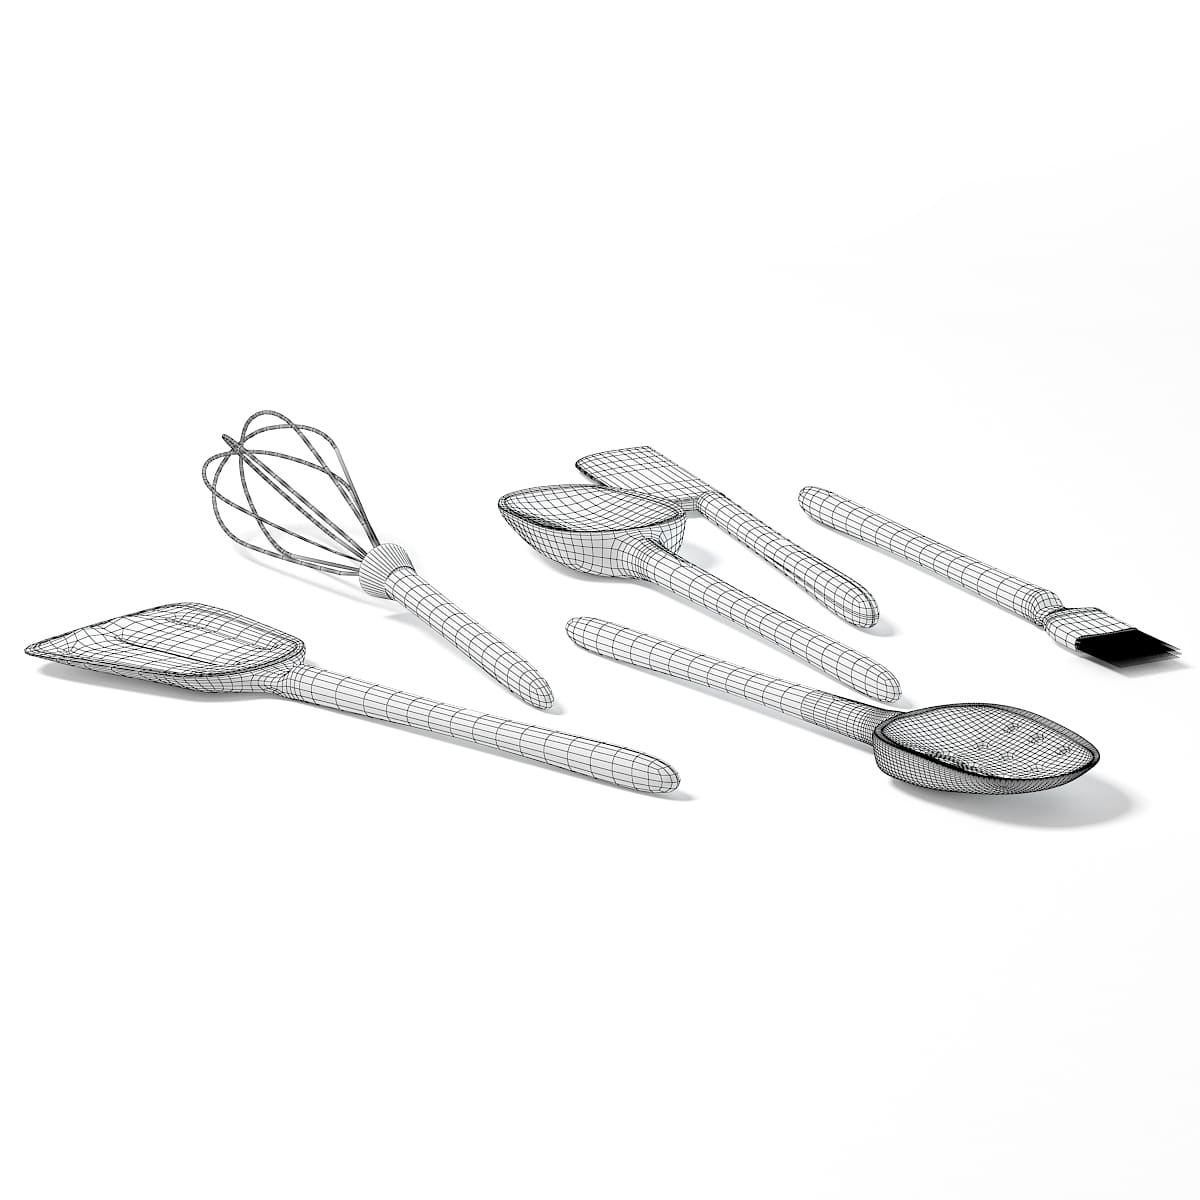 Kitchen Utensils 3D Model - CGAxis - 3D models, PBR, HDRI for your 3D  visualizations projects